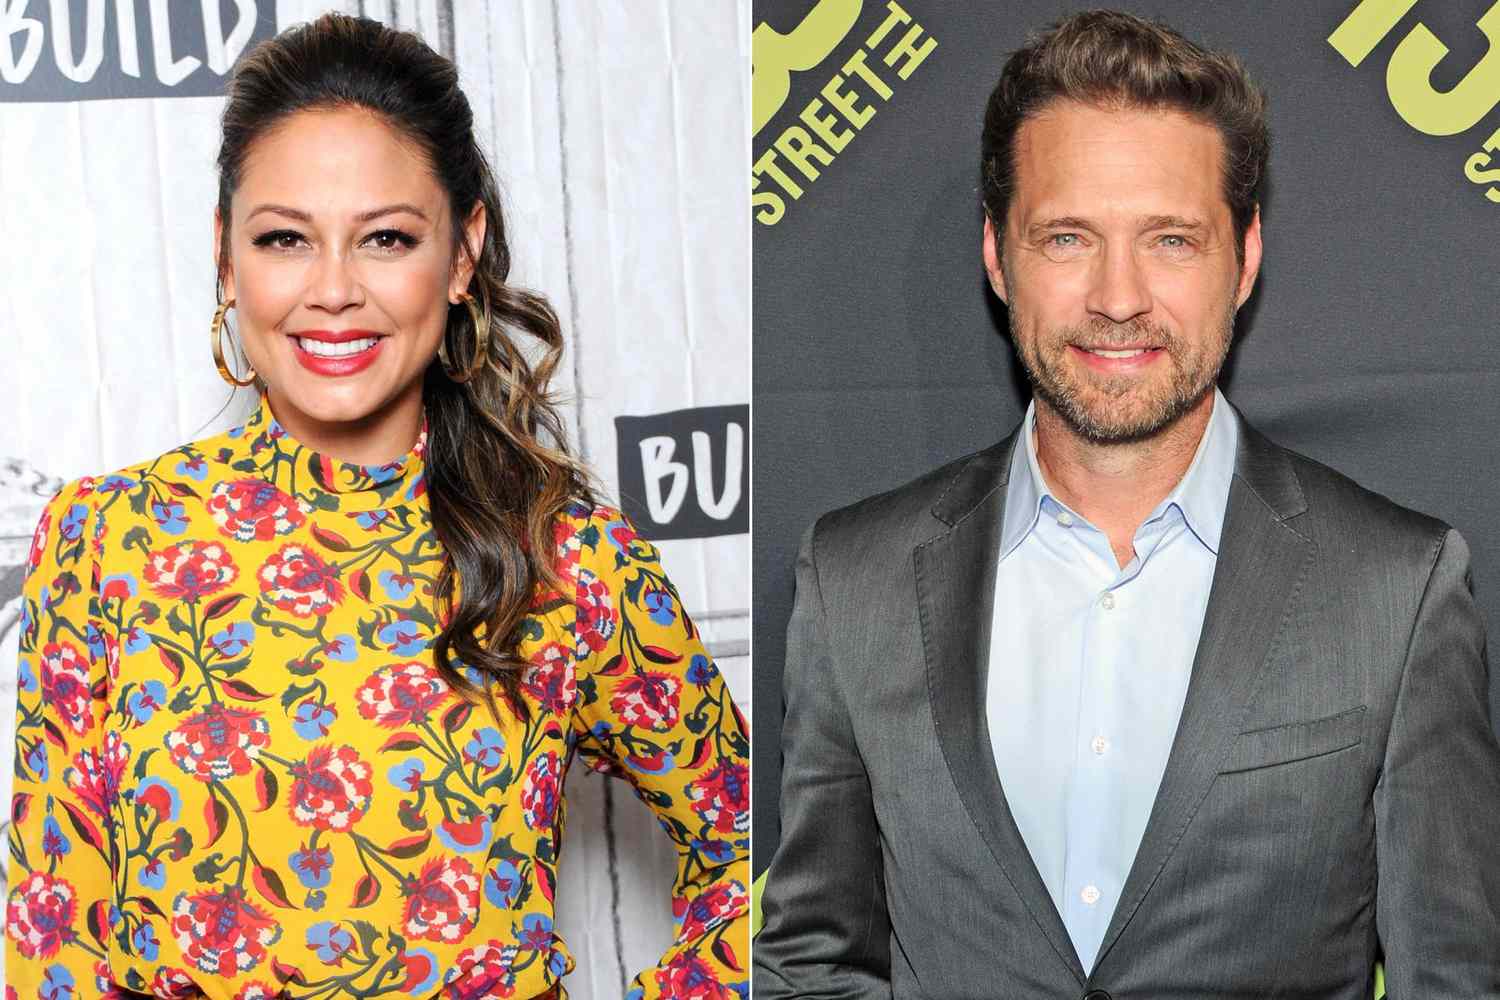 NEW YORK, NY - SEPTEMBER 06: TV personality Vanessa Lachey visits Build Series to discuss TV series 'Top Chef Junior' at Build Studio on September 6, 2018 in New York City. (Photo by Desiree Navarro/Getty Images) 28 May 2018, Germany, Munich: The Canadian-US-American actor Jason Priestley attends the Germany premiere of the crime series 'Private Eyes'. The Pay TV channel 13th street will be the first to air the first season of the crime series on 16 July 2018. Photo: Ursula D&uuml;ren/dpa (Photo by Ursula D&uuml;ren/picture alliance via Getty Images)